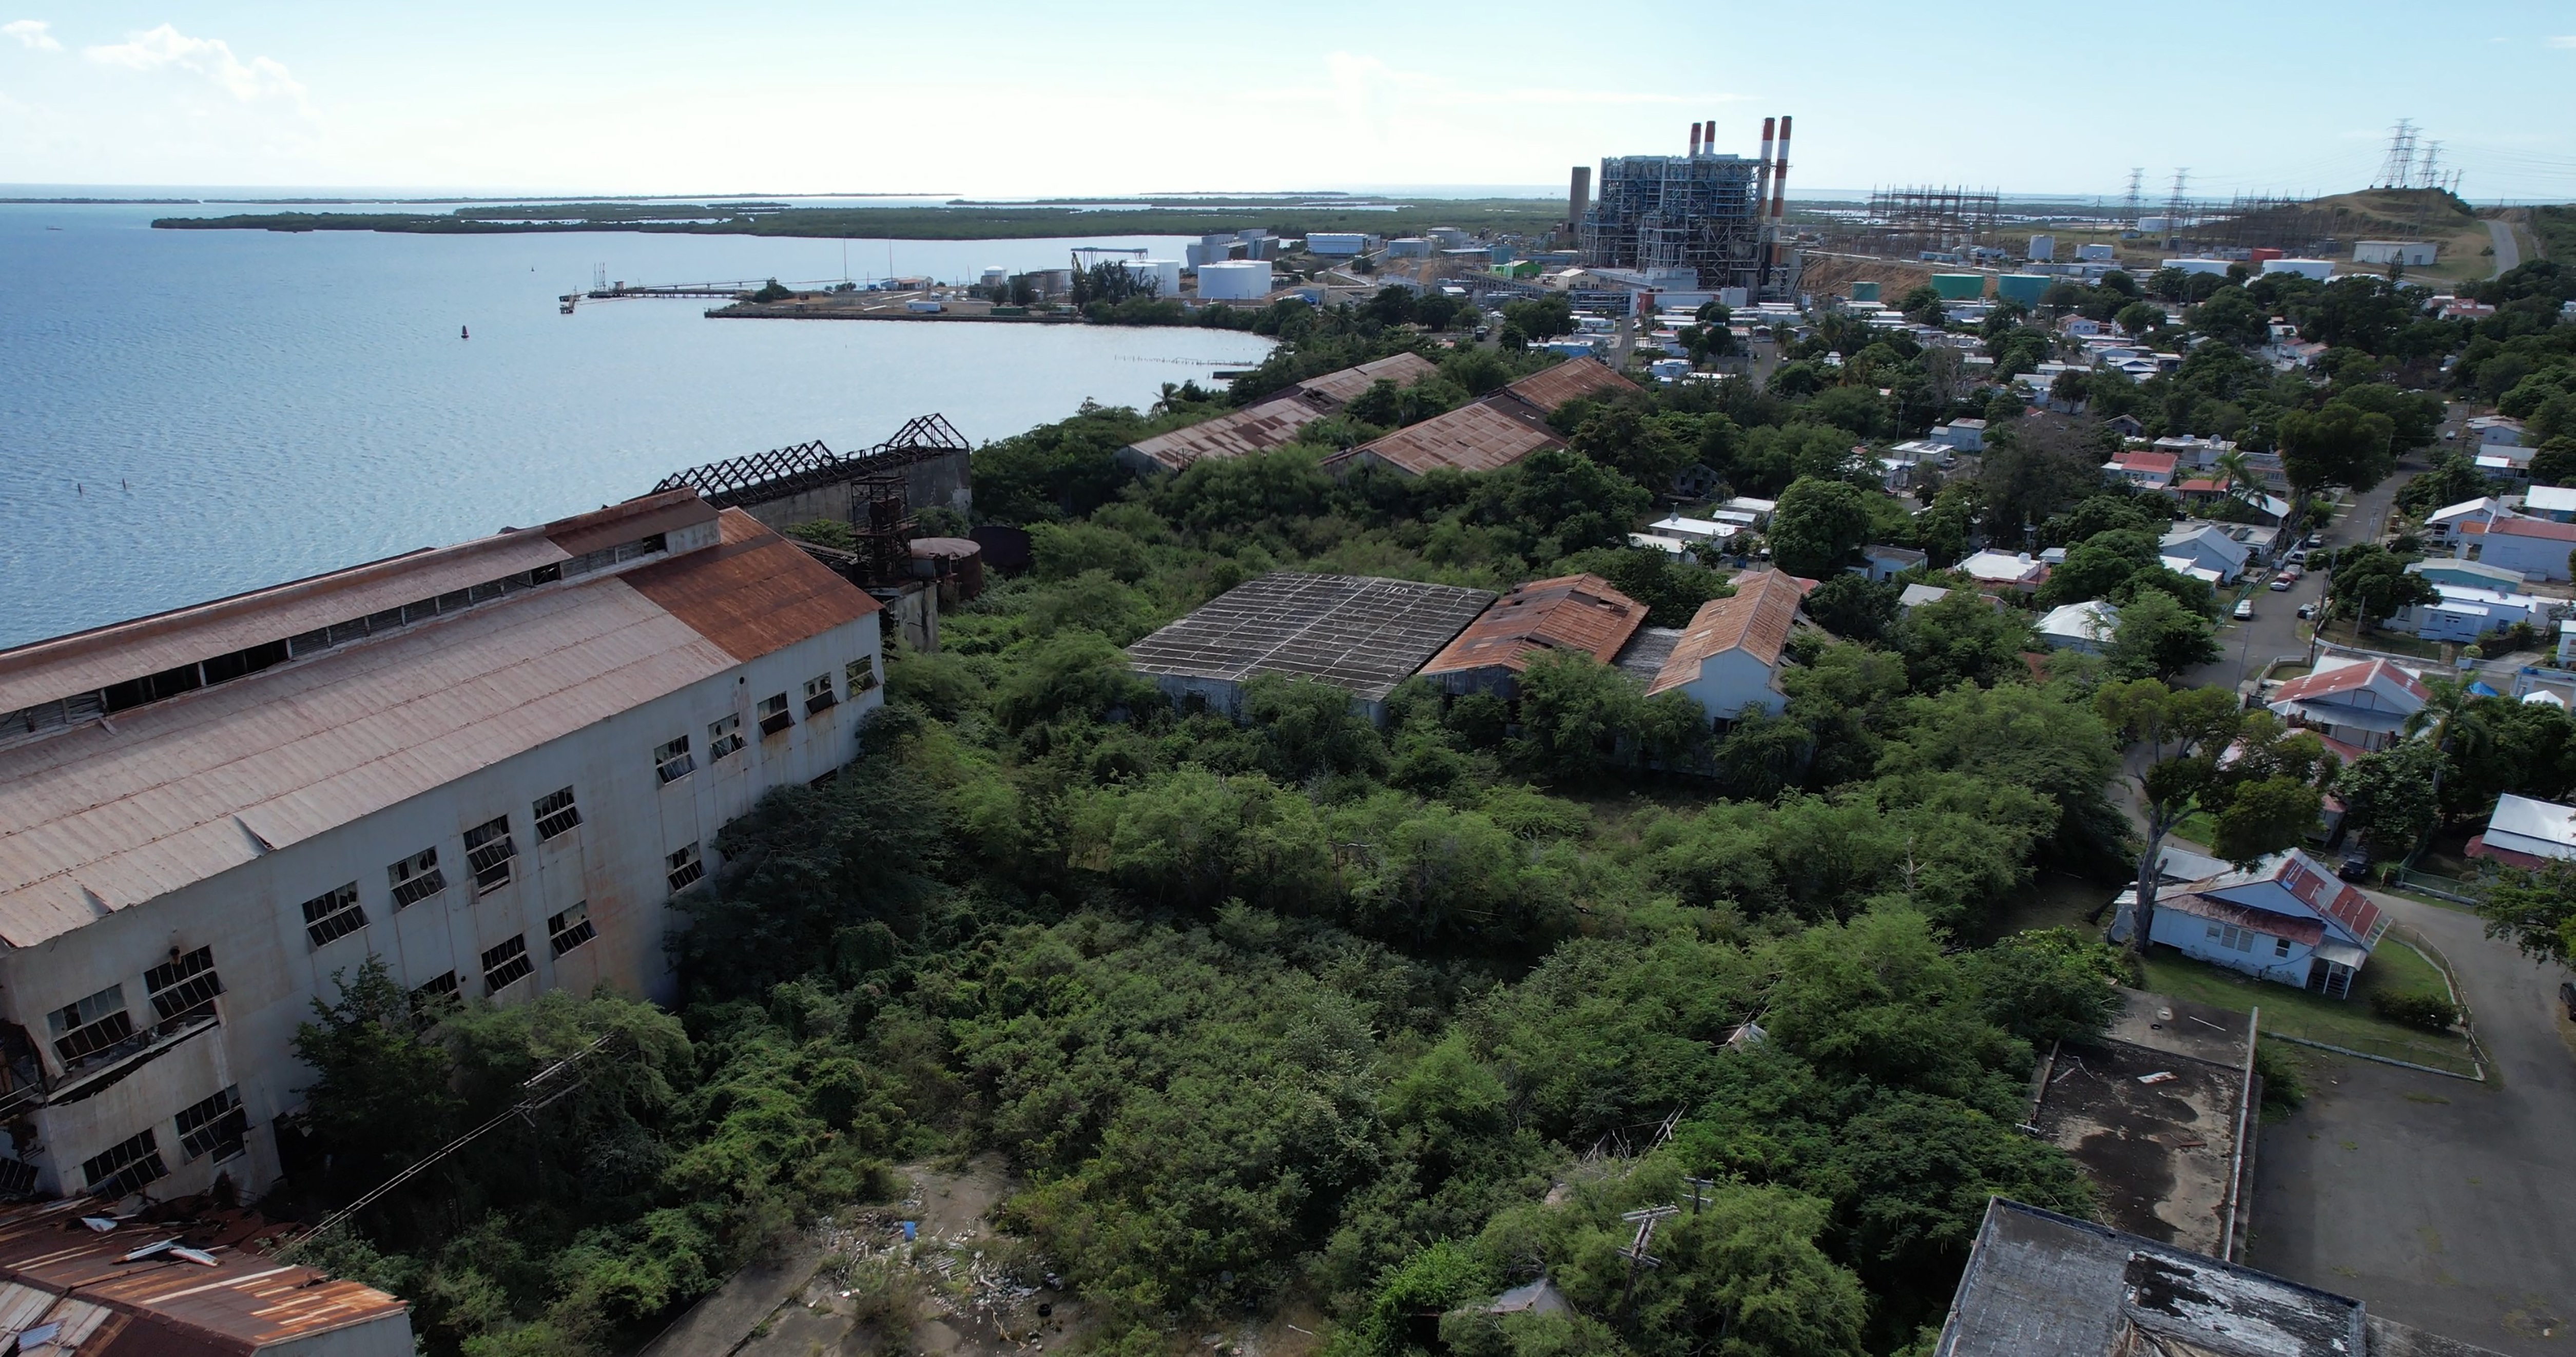 This image shows an urban area that seems to have once hosted industrial activity but is now largely covered in vegetation. A more densely built area is visible in the background.